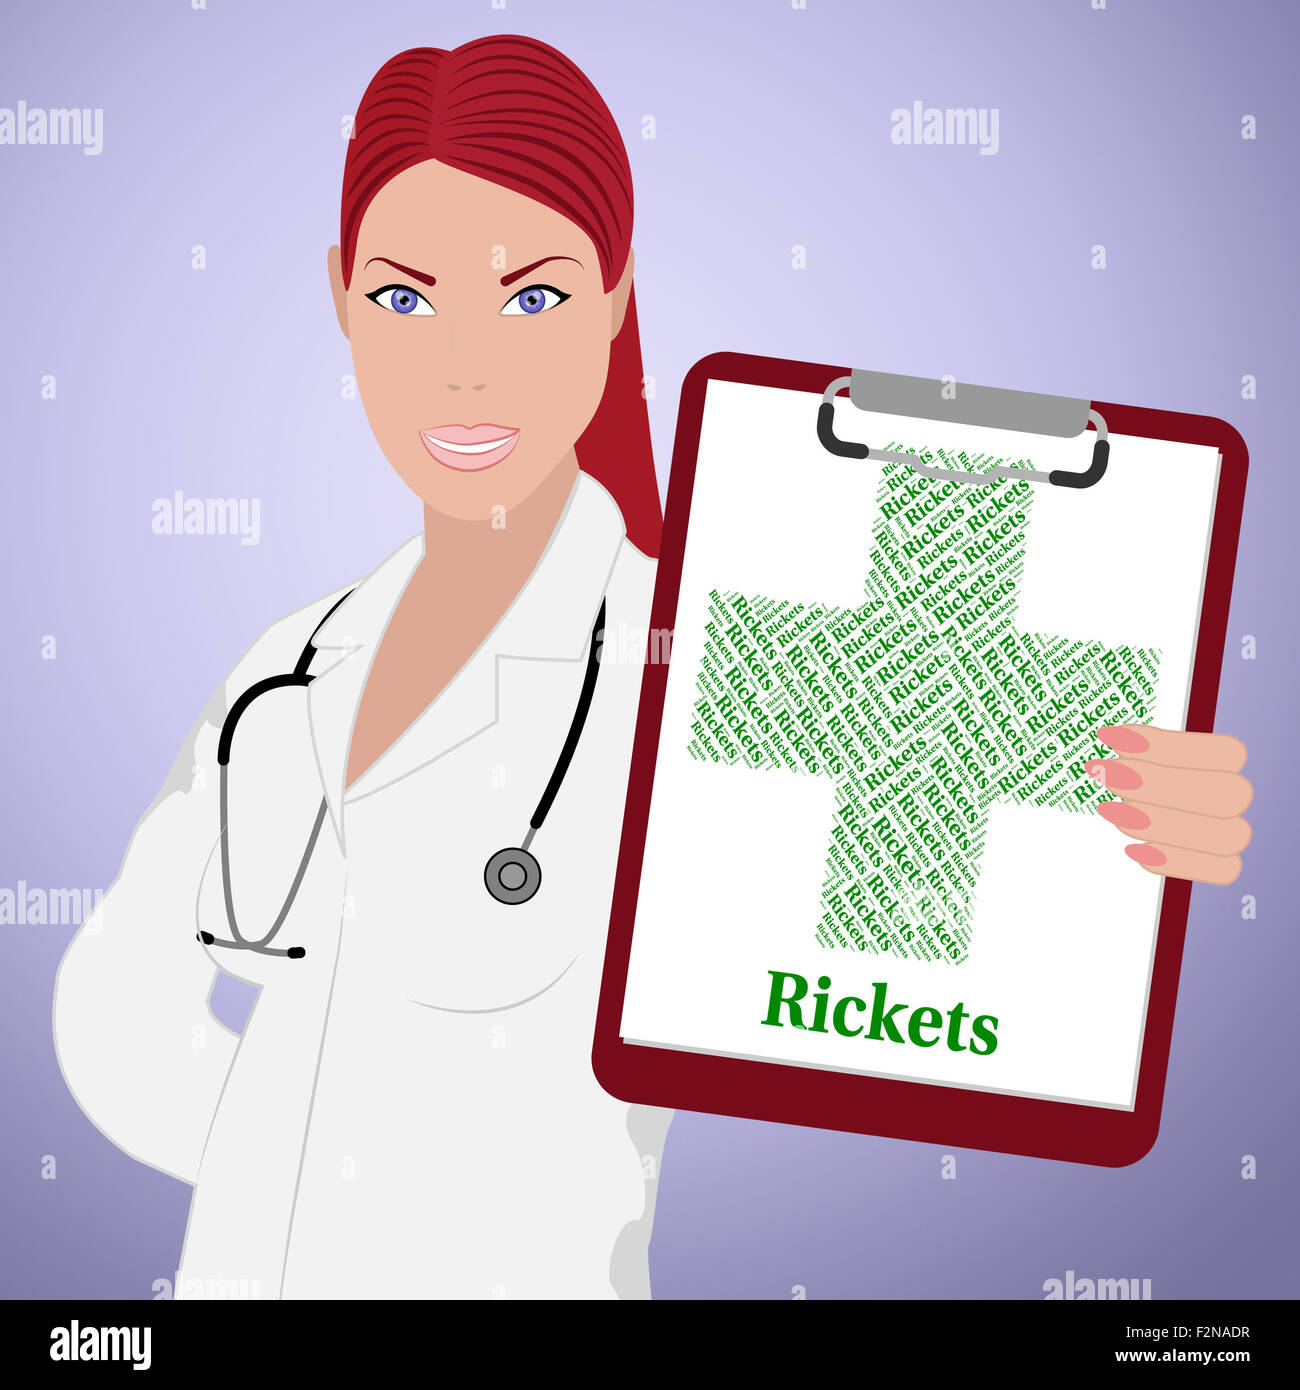 Rickets Word Showing Ill Health And Afflictions Stock Photo